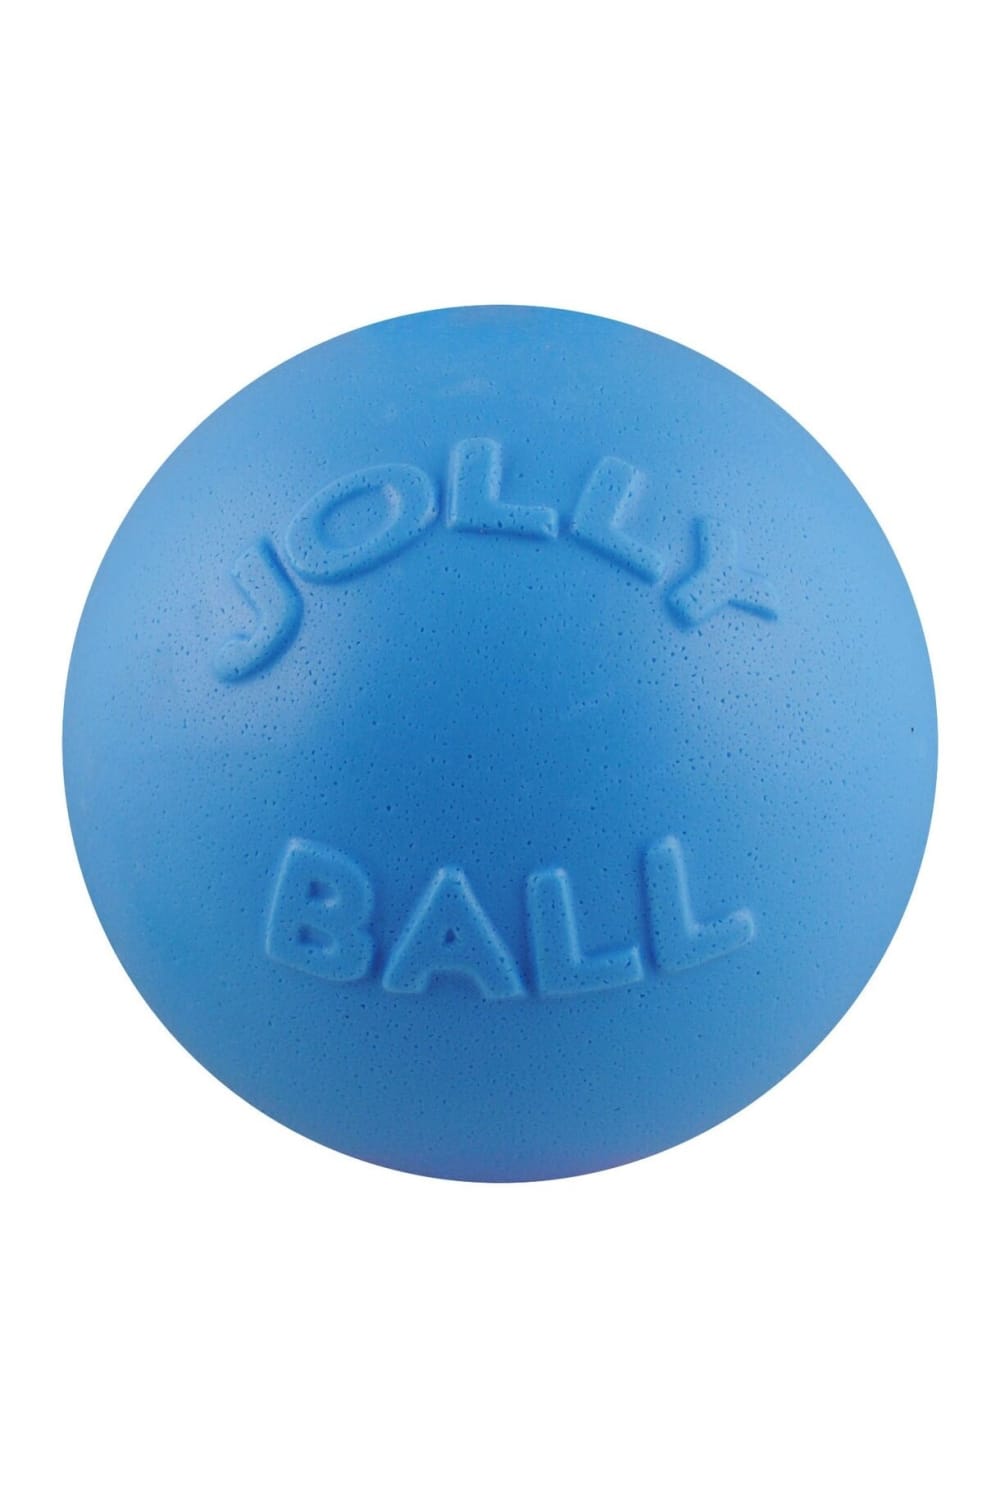 Jolly Pets Bounce-n-Play Jolly Ball (Blueberry) (6 inches)